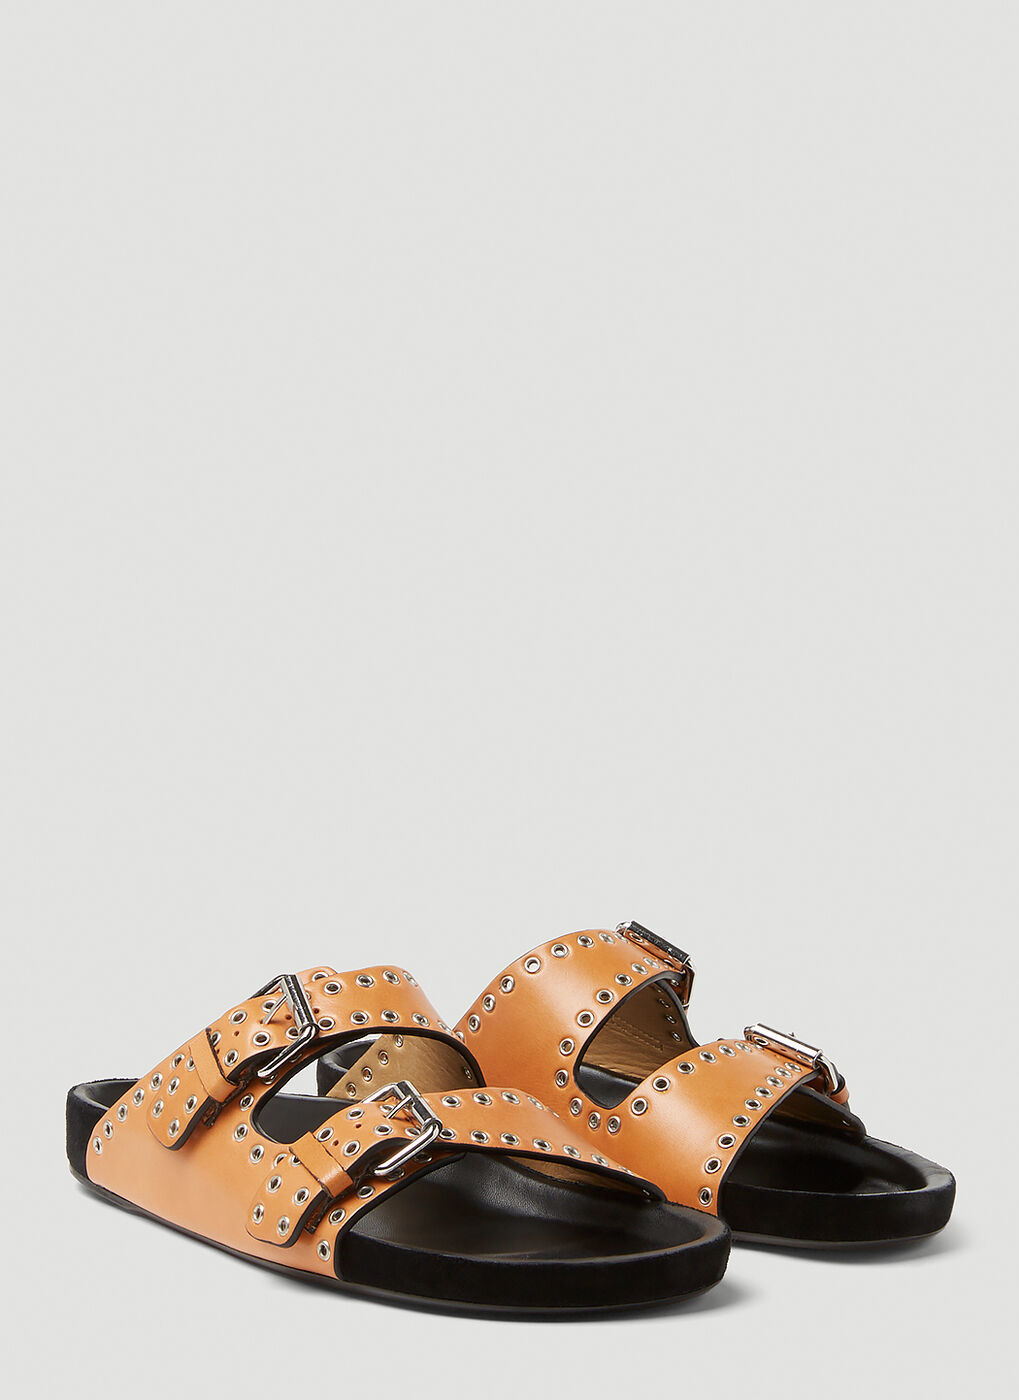 Lennyo Sandals in Brown